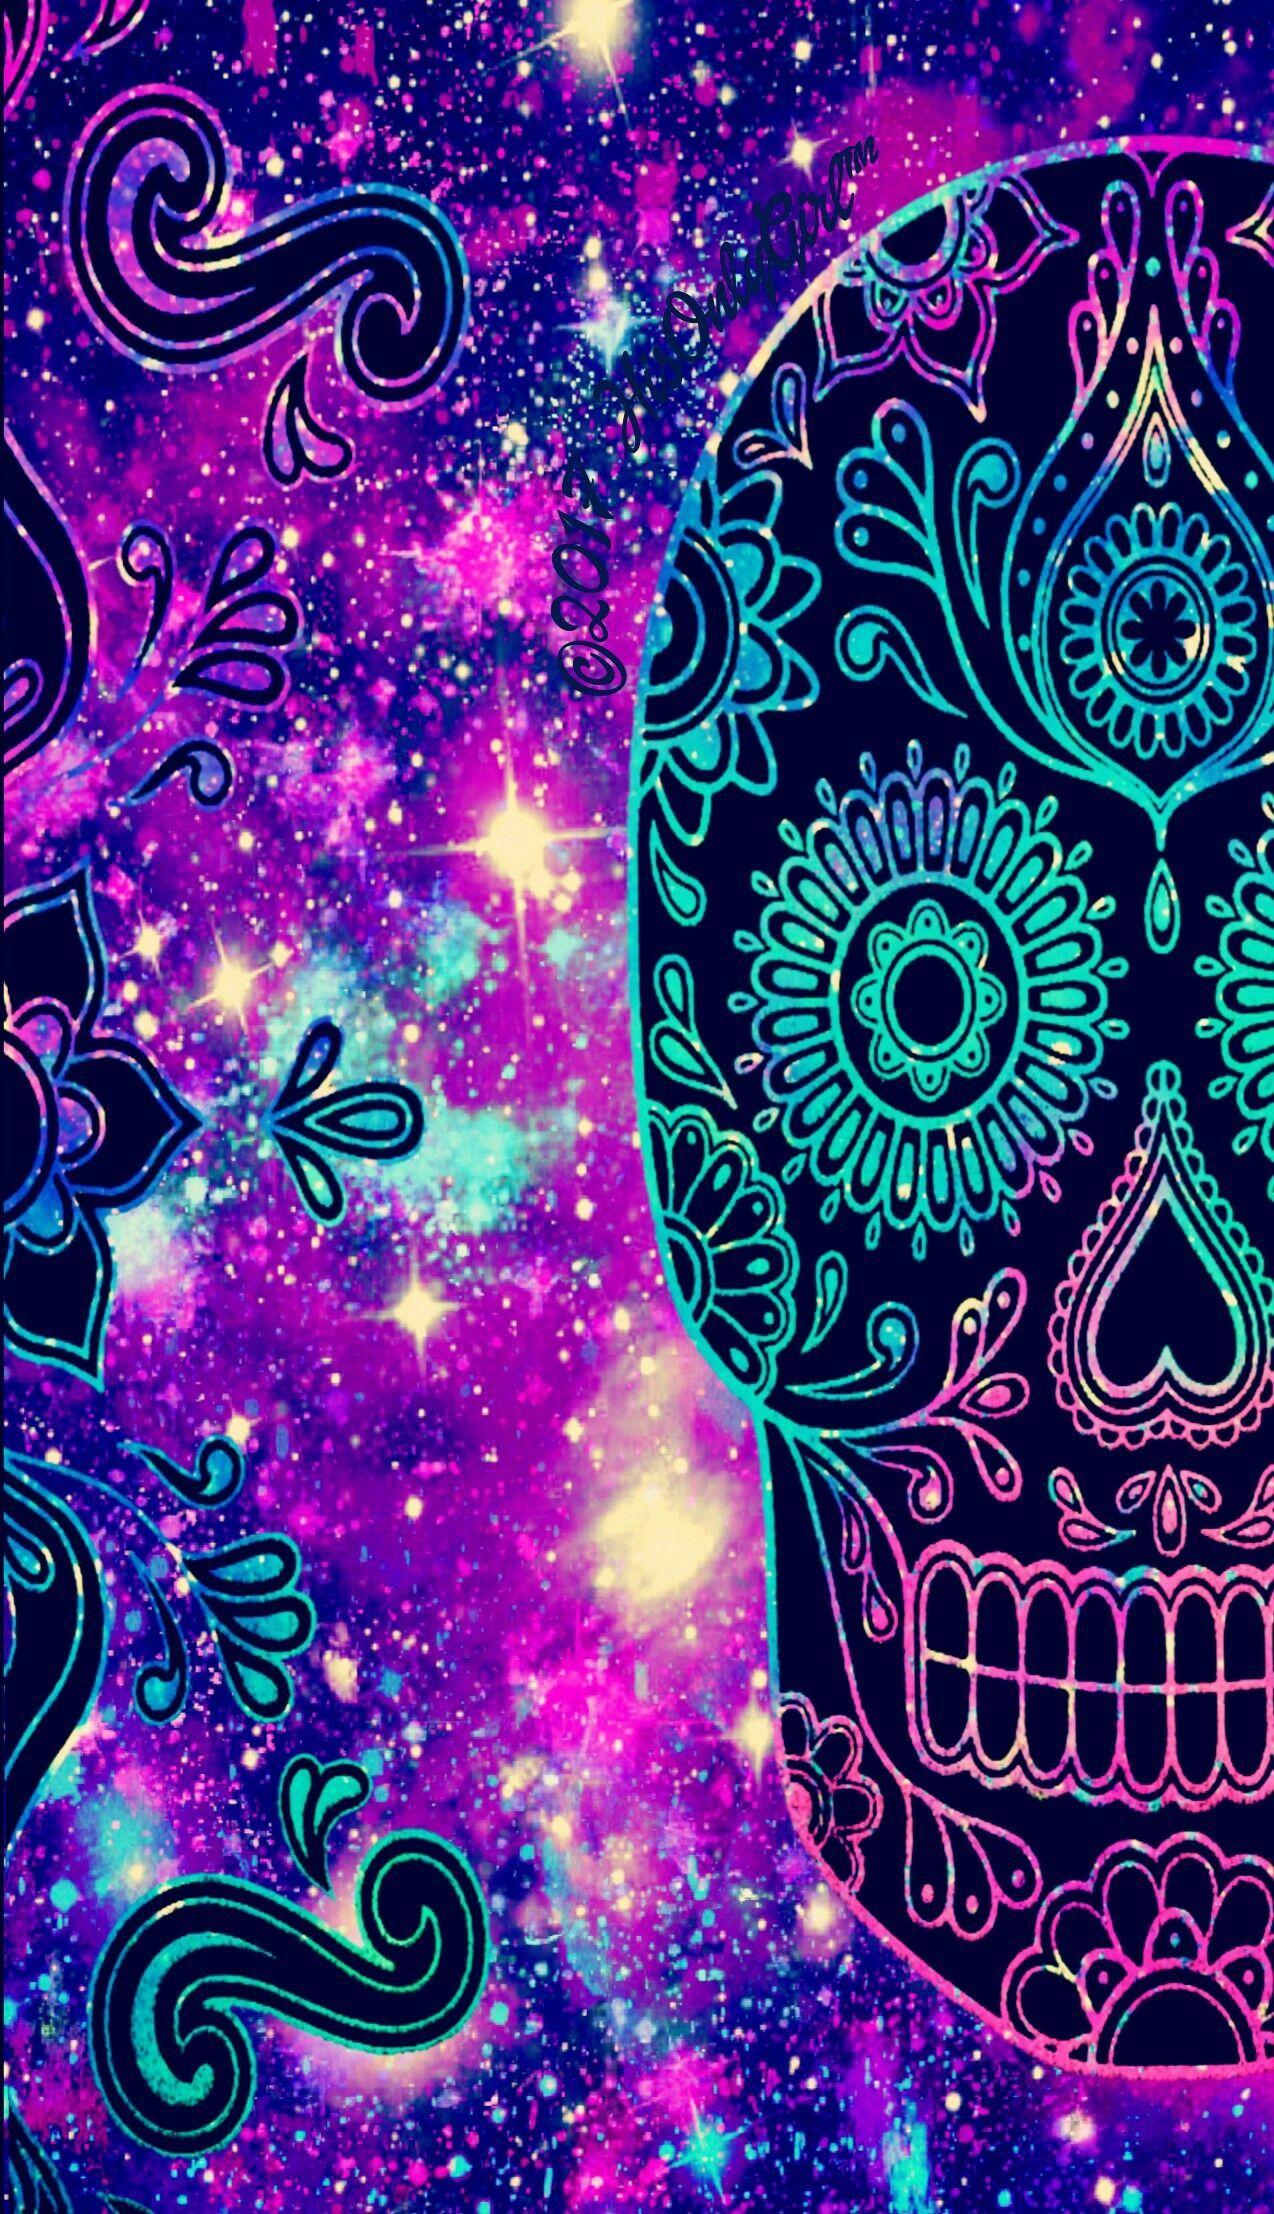 Colorful Tribal galaxy skull wallpaper I created for the app CocoPPa